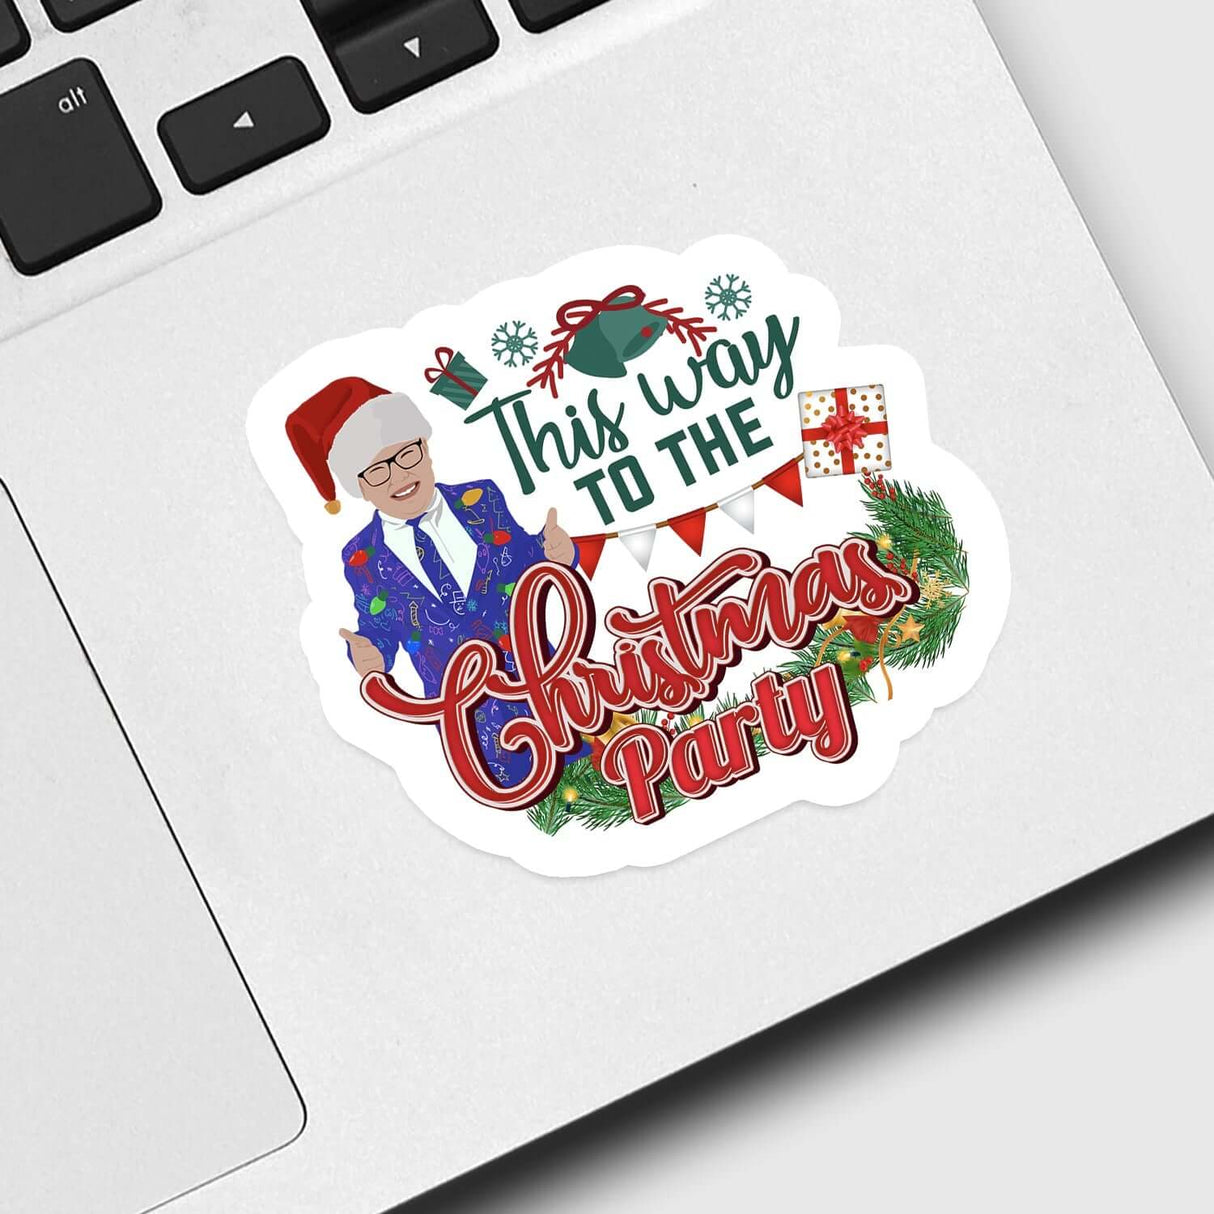 This Way to The Christmas Party Sticker Personalized